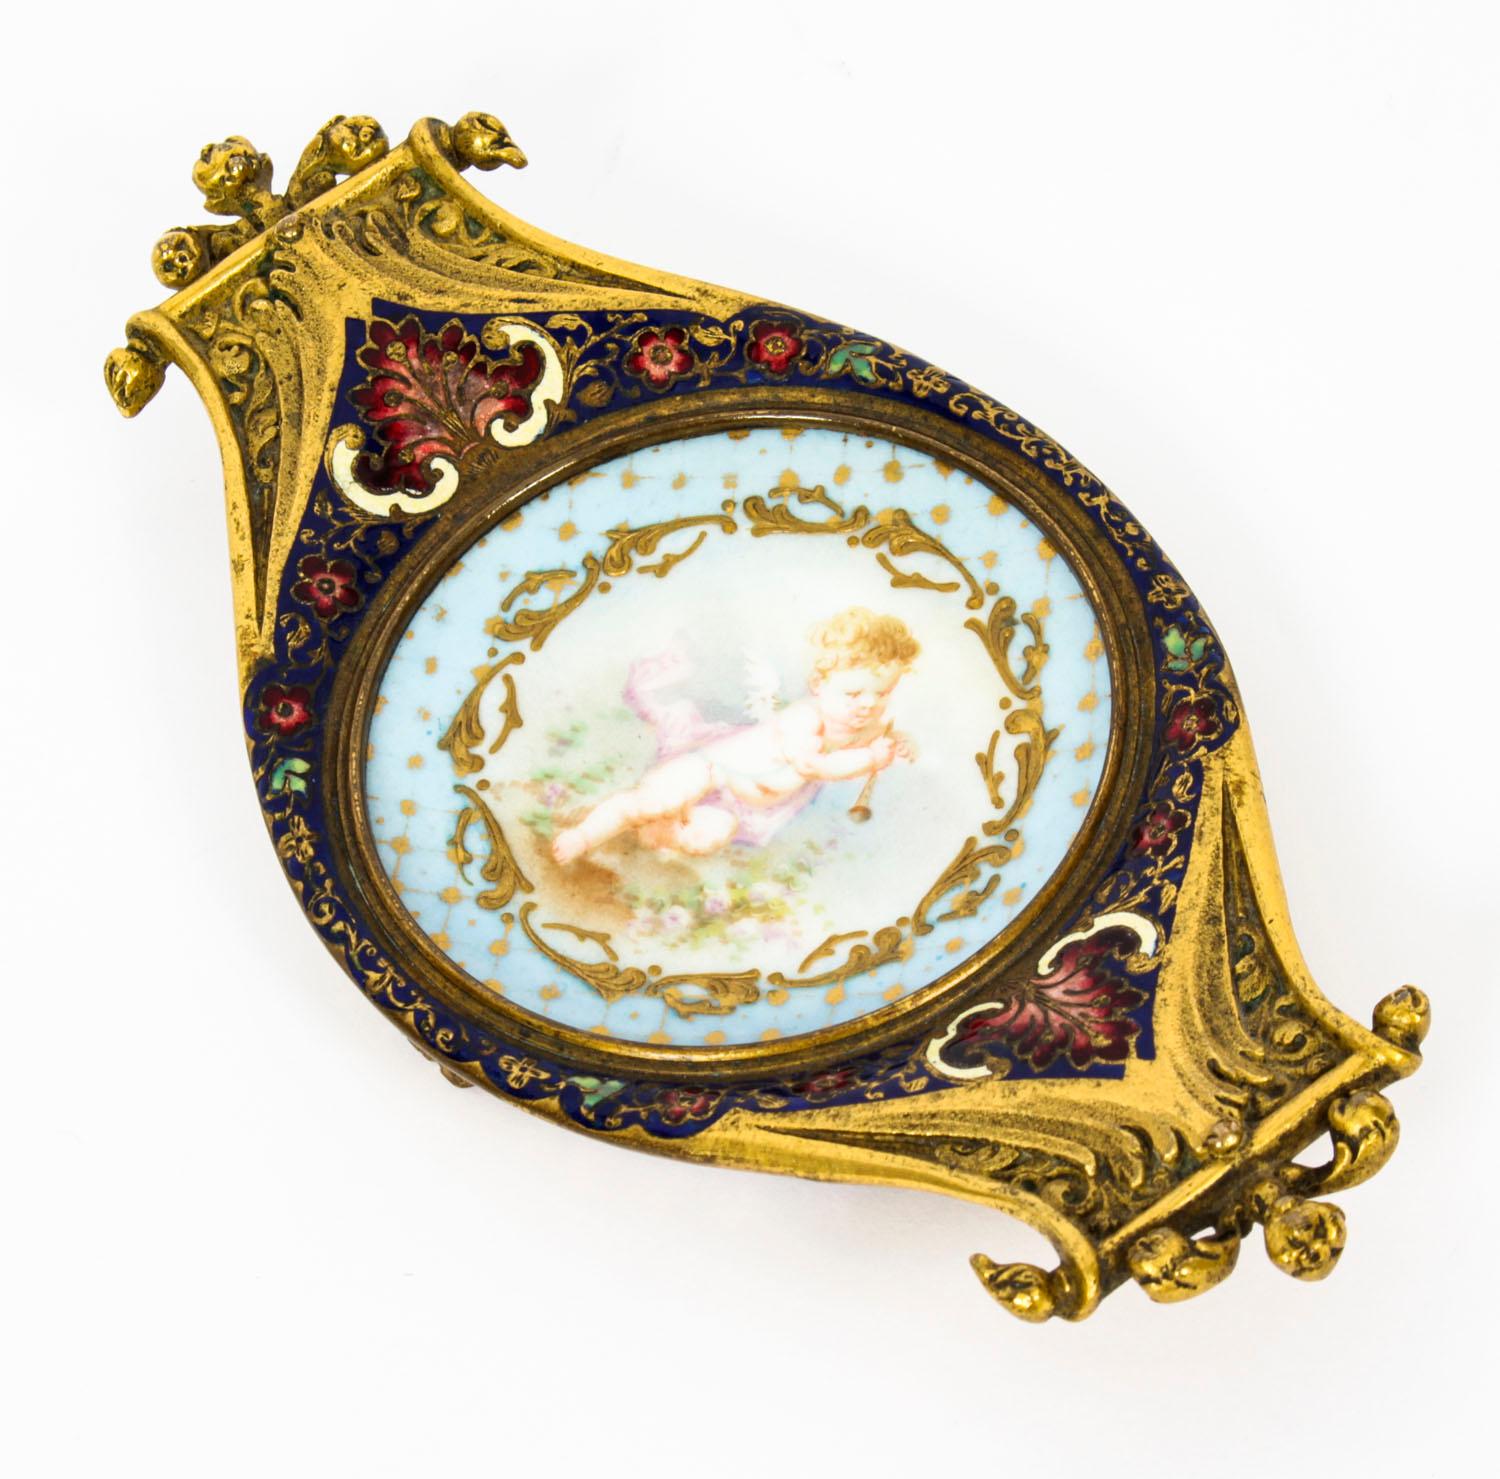 Antique French Ormolu and Champlevé Enamel Pin Tray, 19th Century For Sale 2